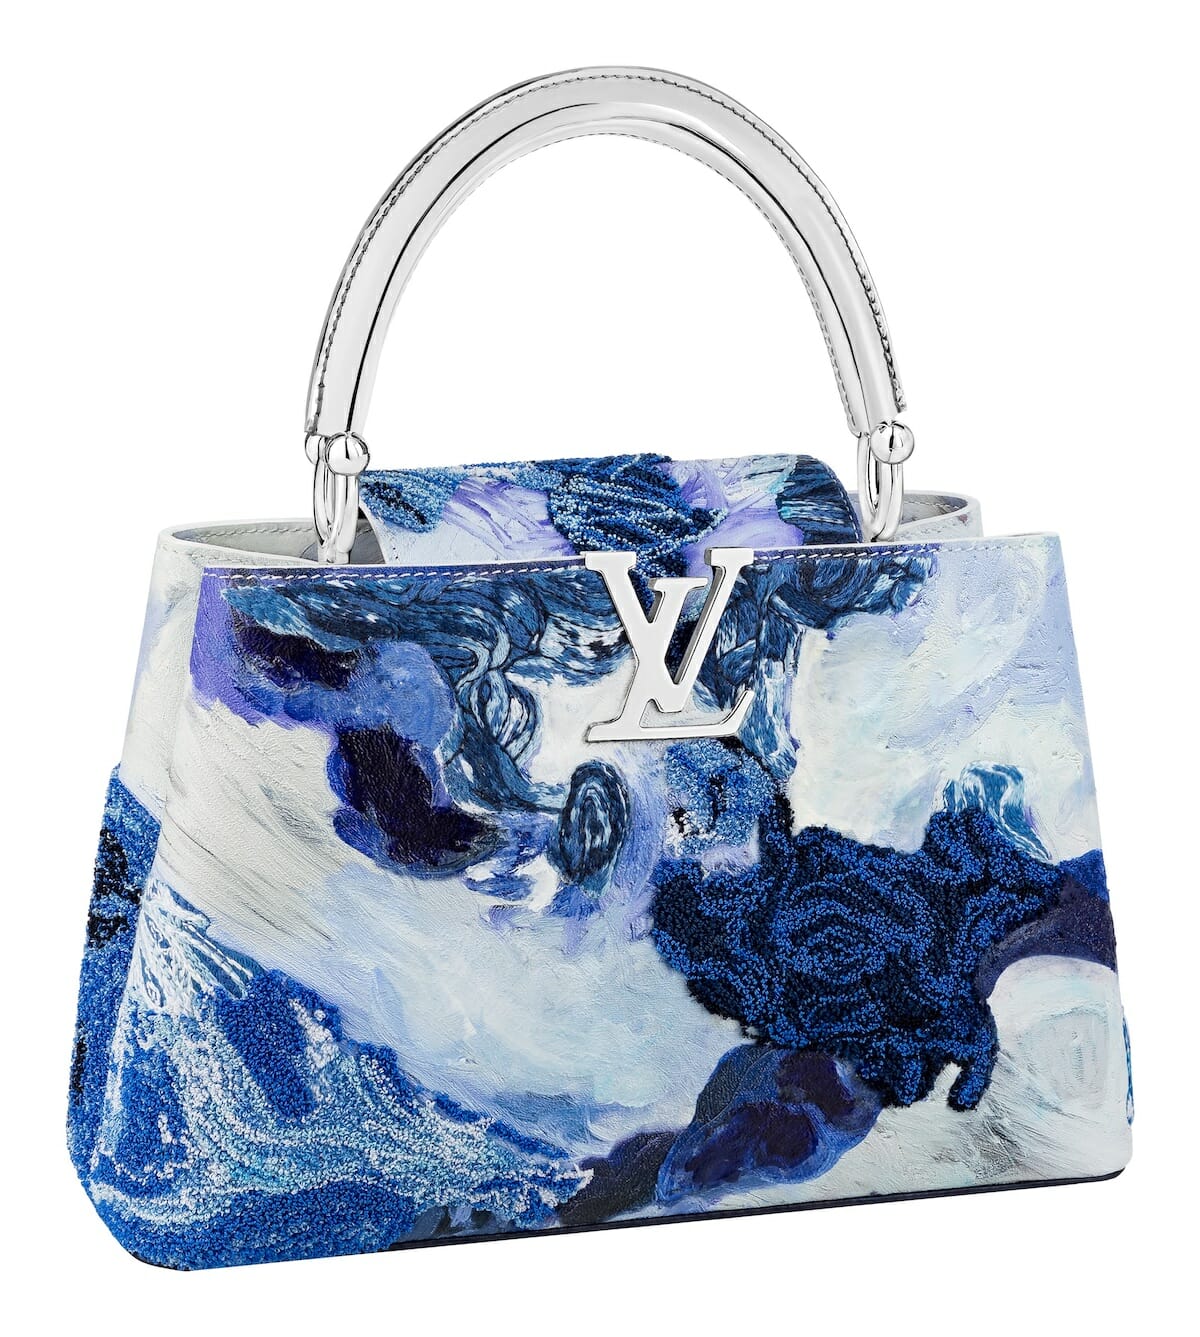 Louis Vuitton & The Six Artists Who Contributed to the Artycapucines  collection - V Magazine